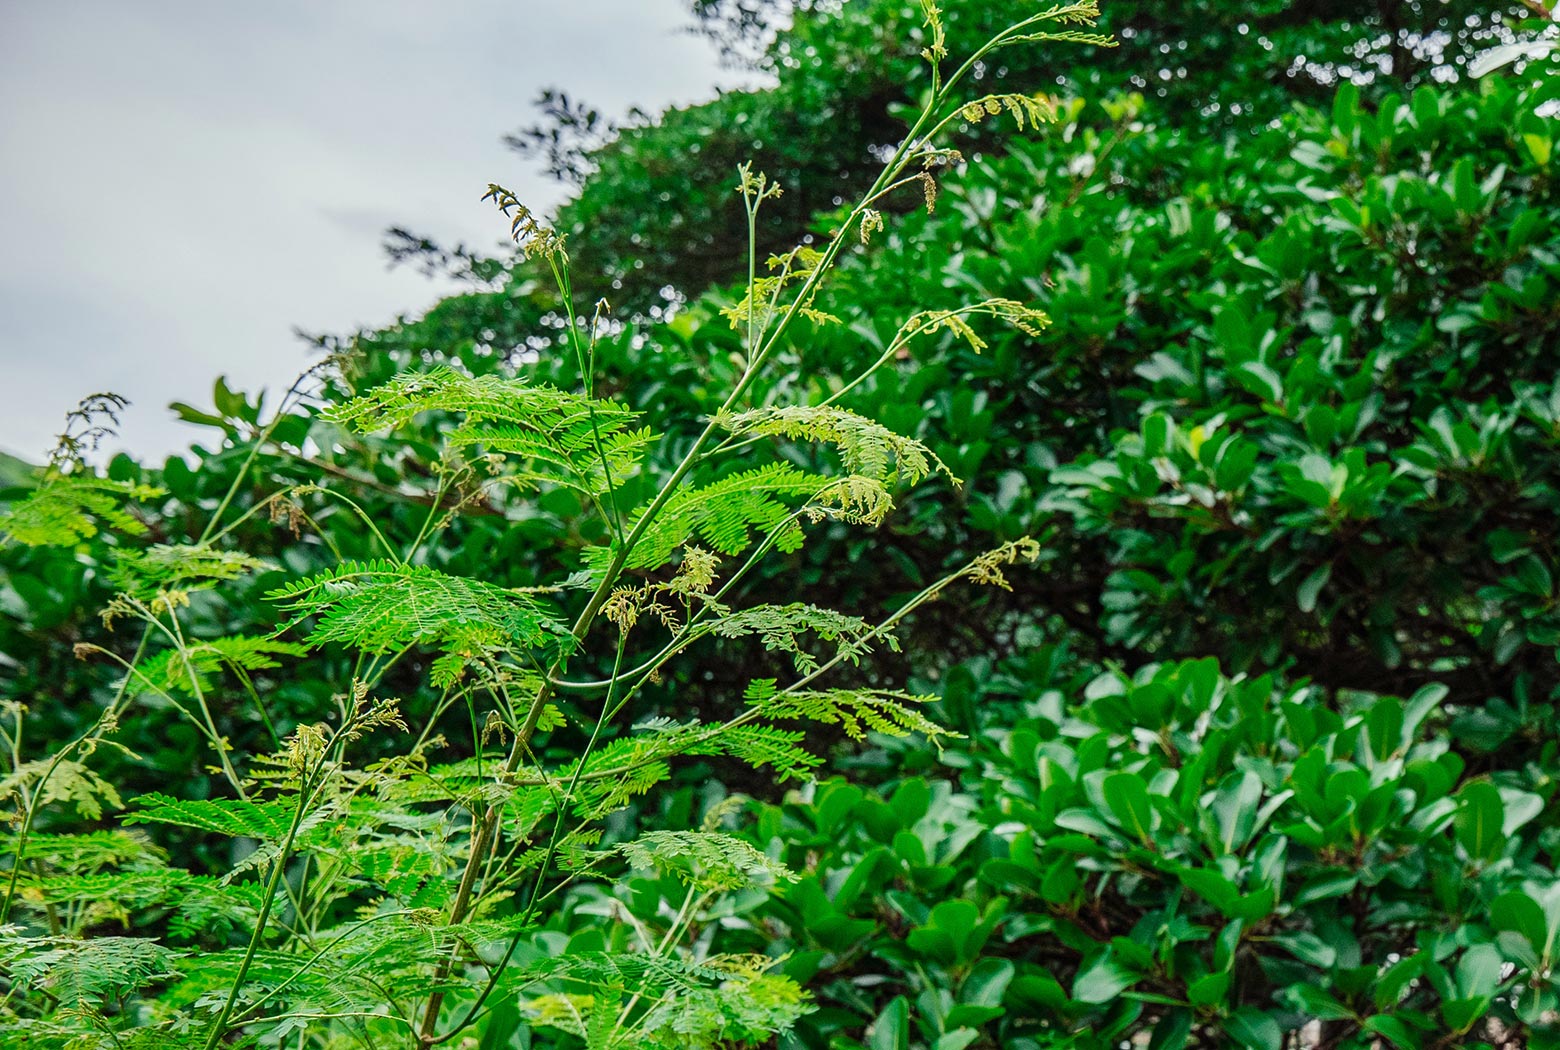 Picture of lush green vegetation against a cloudy sky